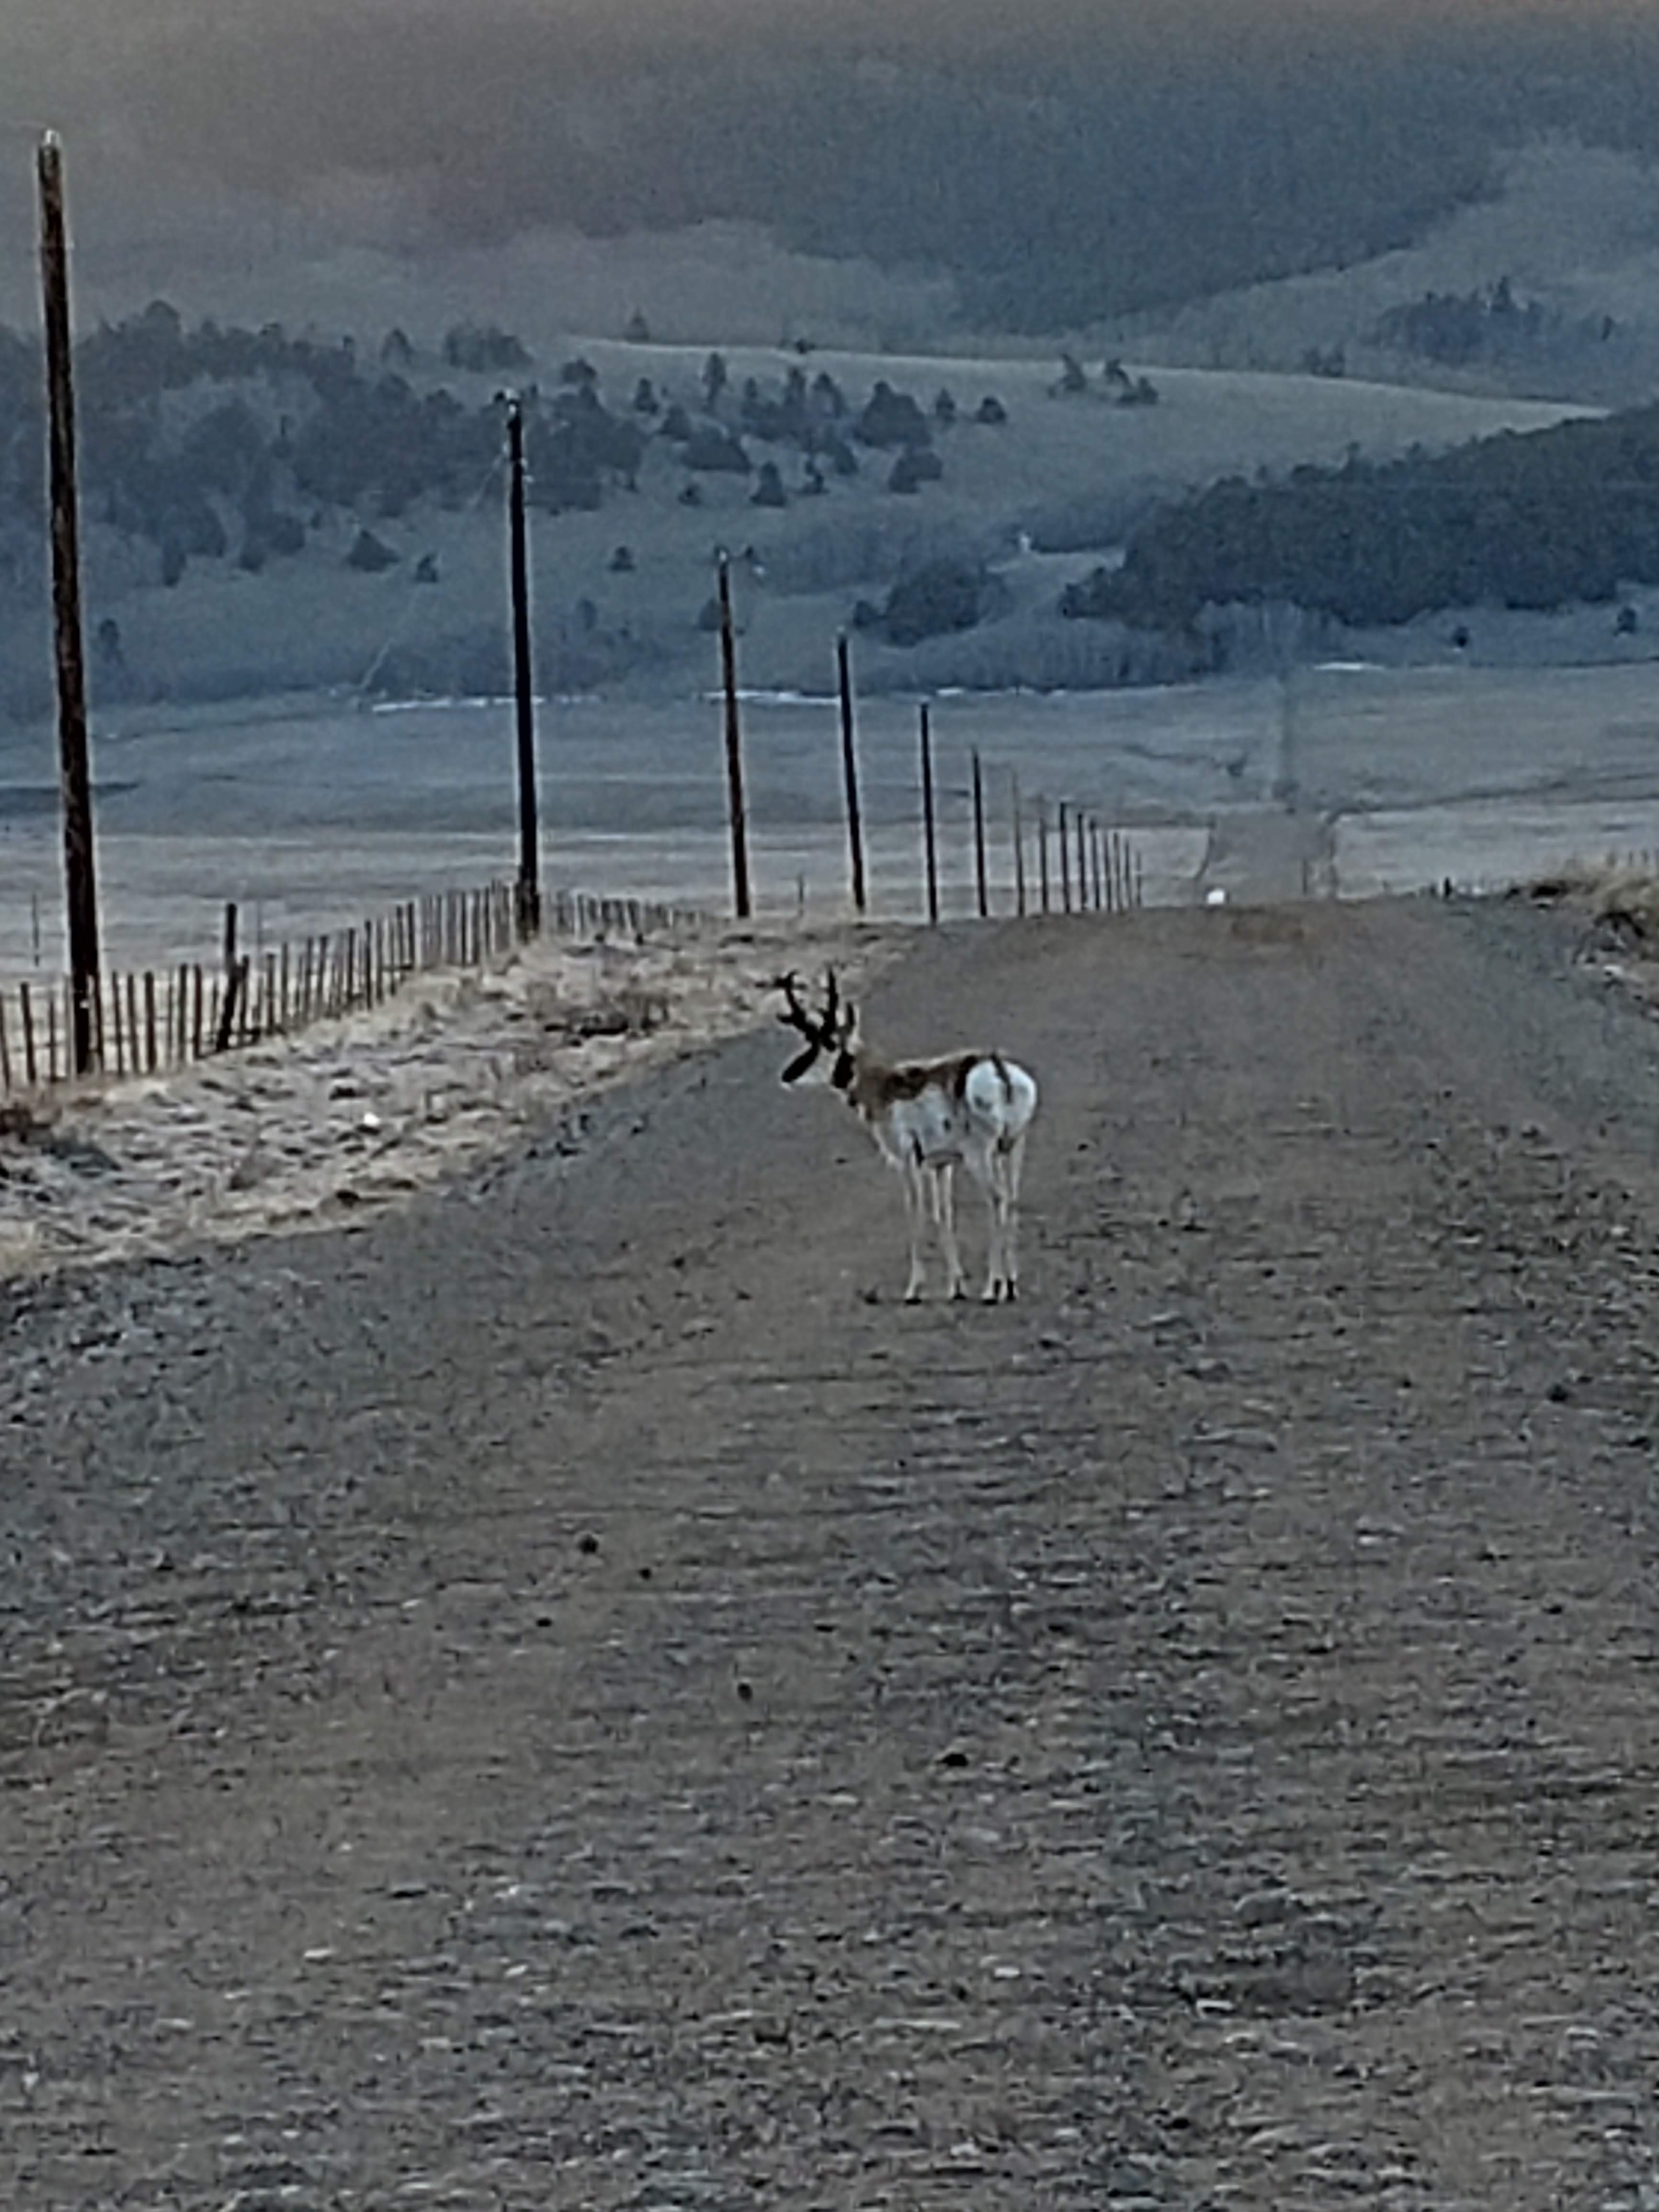 This pronghorn made it difficult to get through, spending 10 minutes juking in front of me on my wild turkey chase.